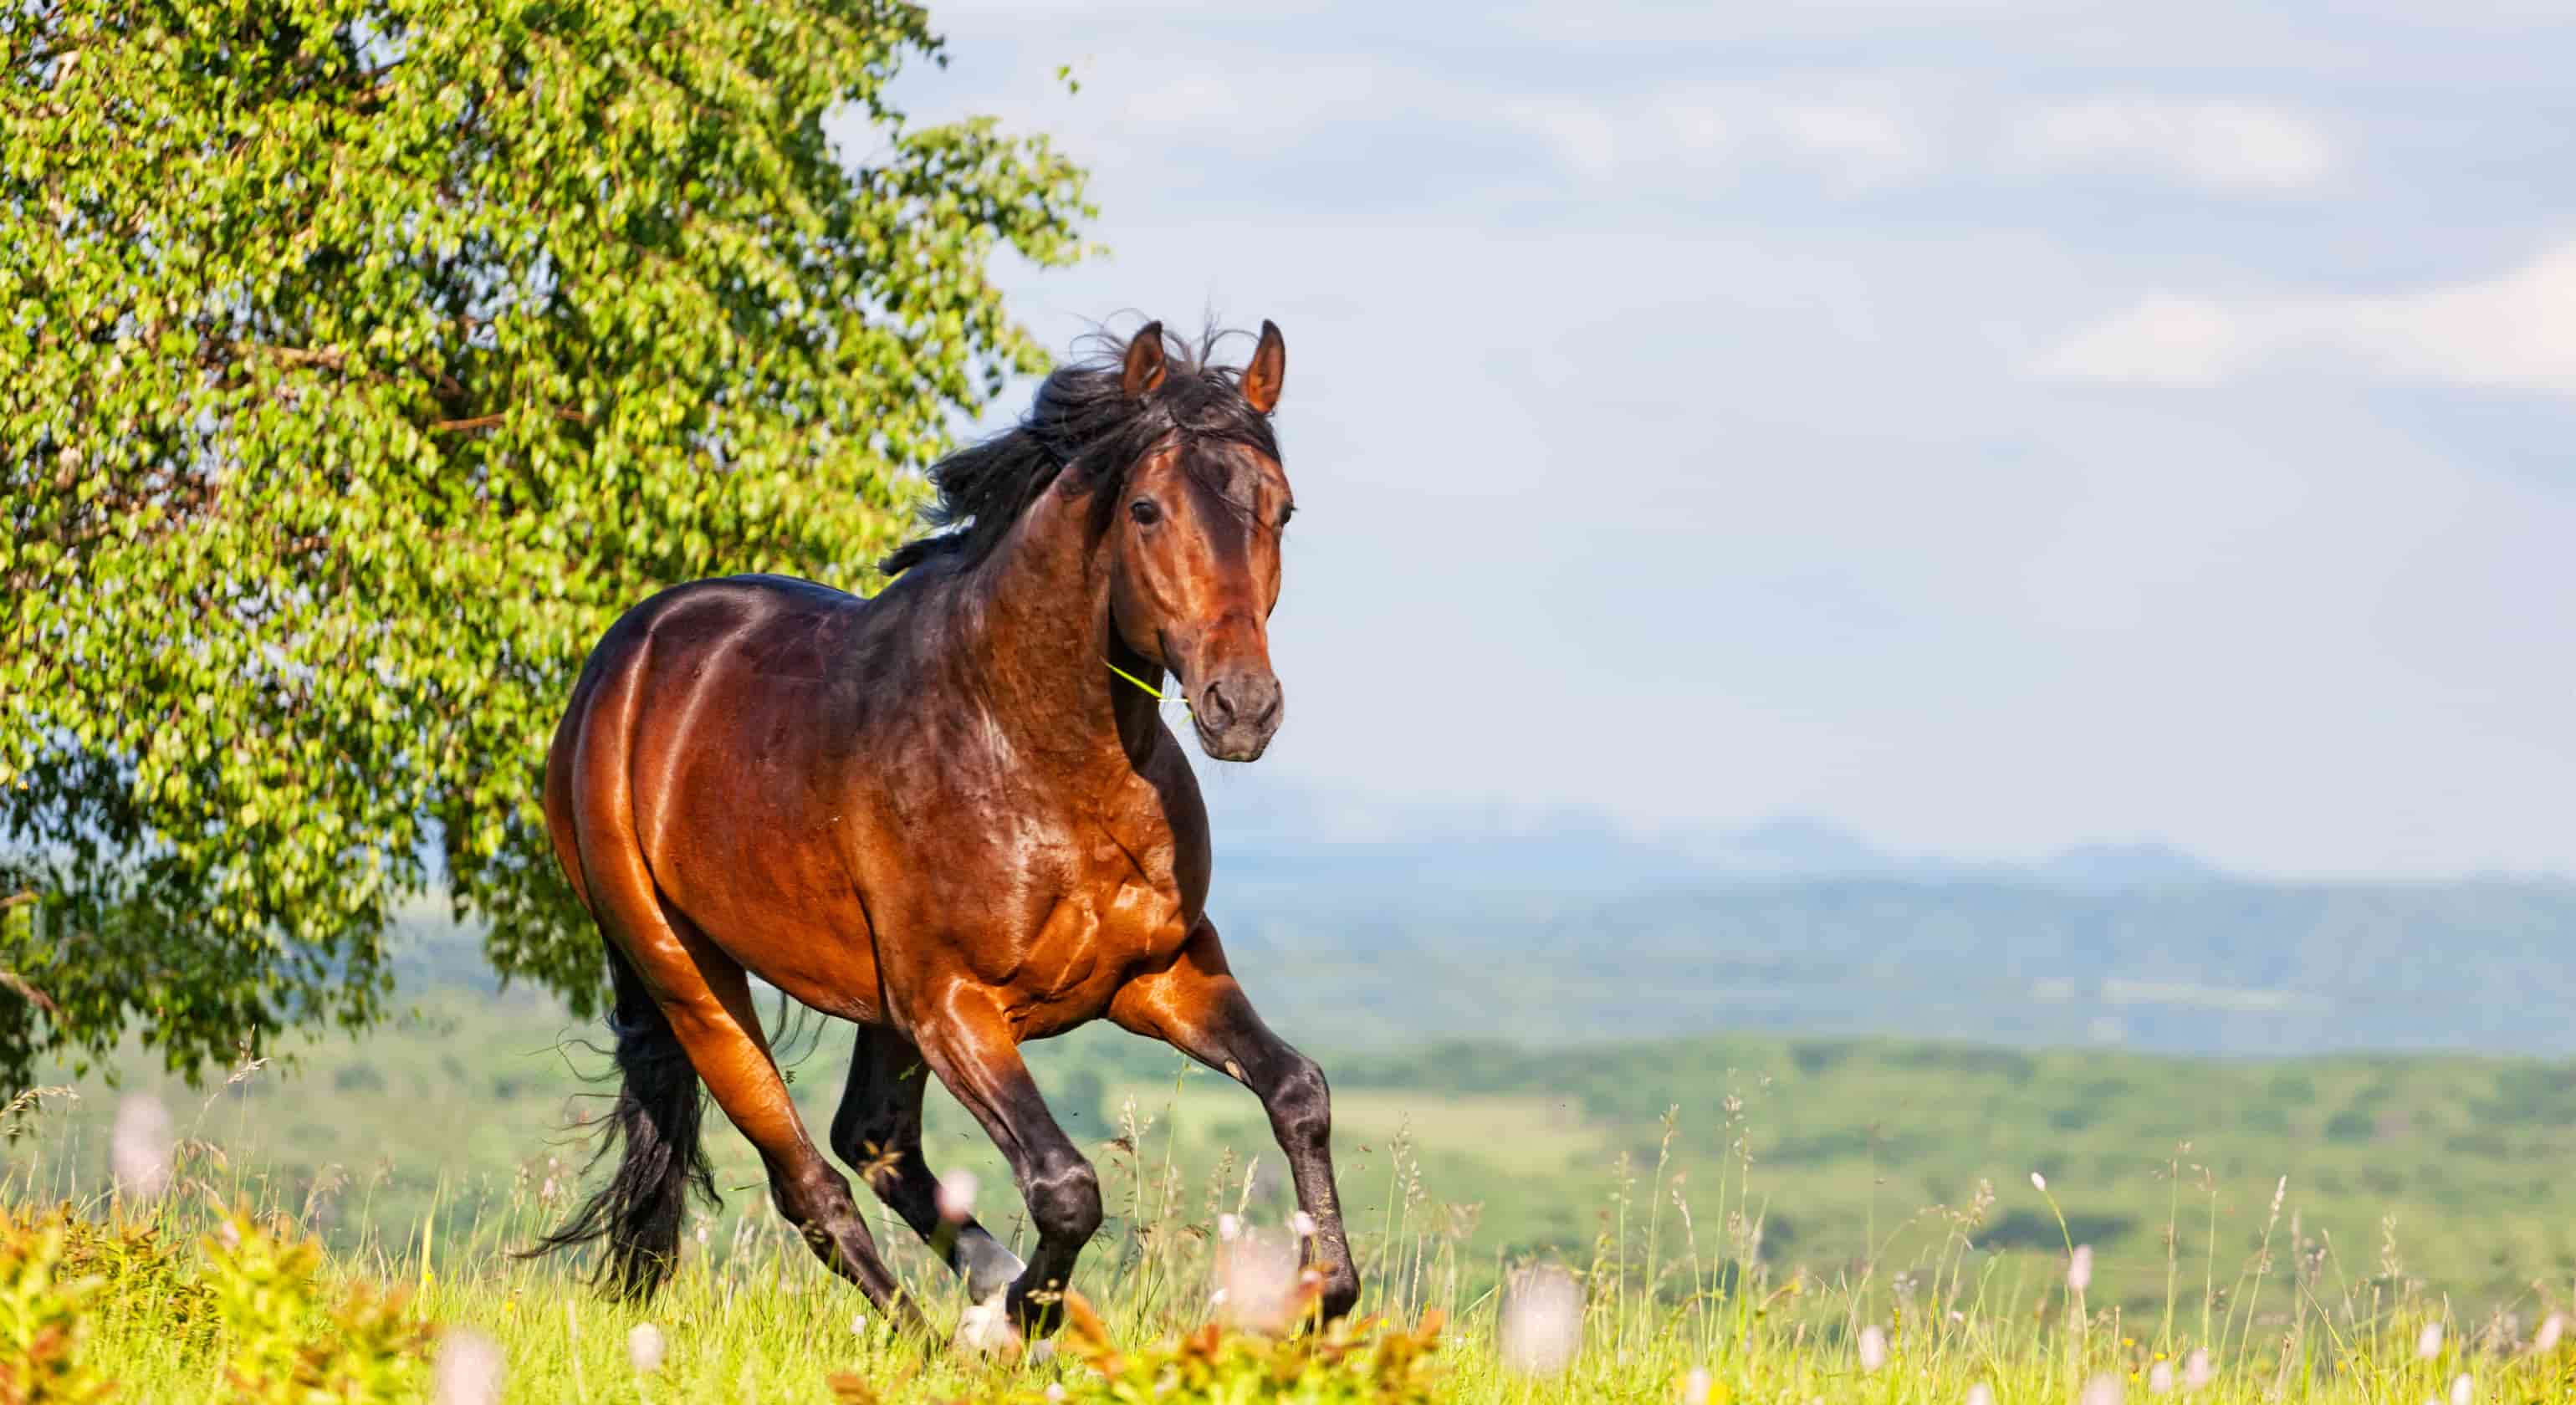 Horse metabolic conditions - Equine Metabolic Syndrome